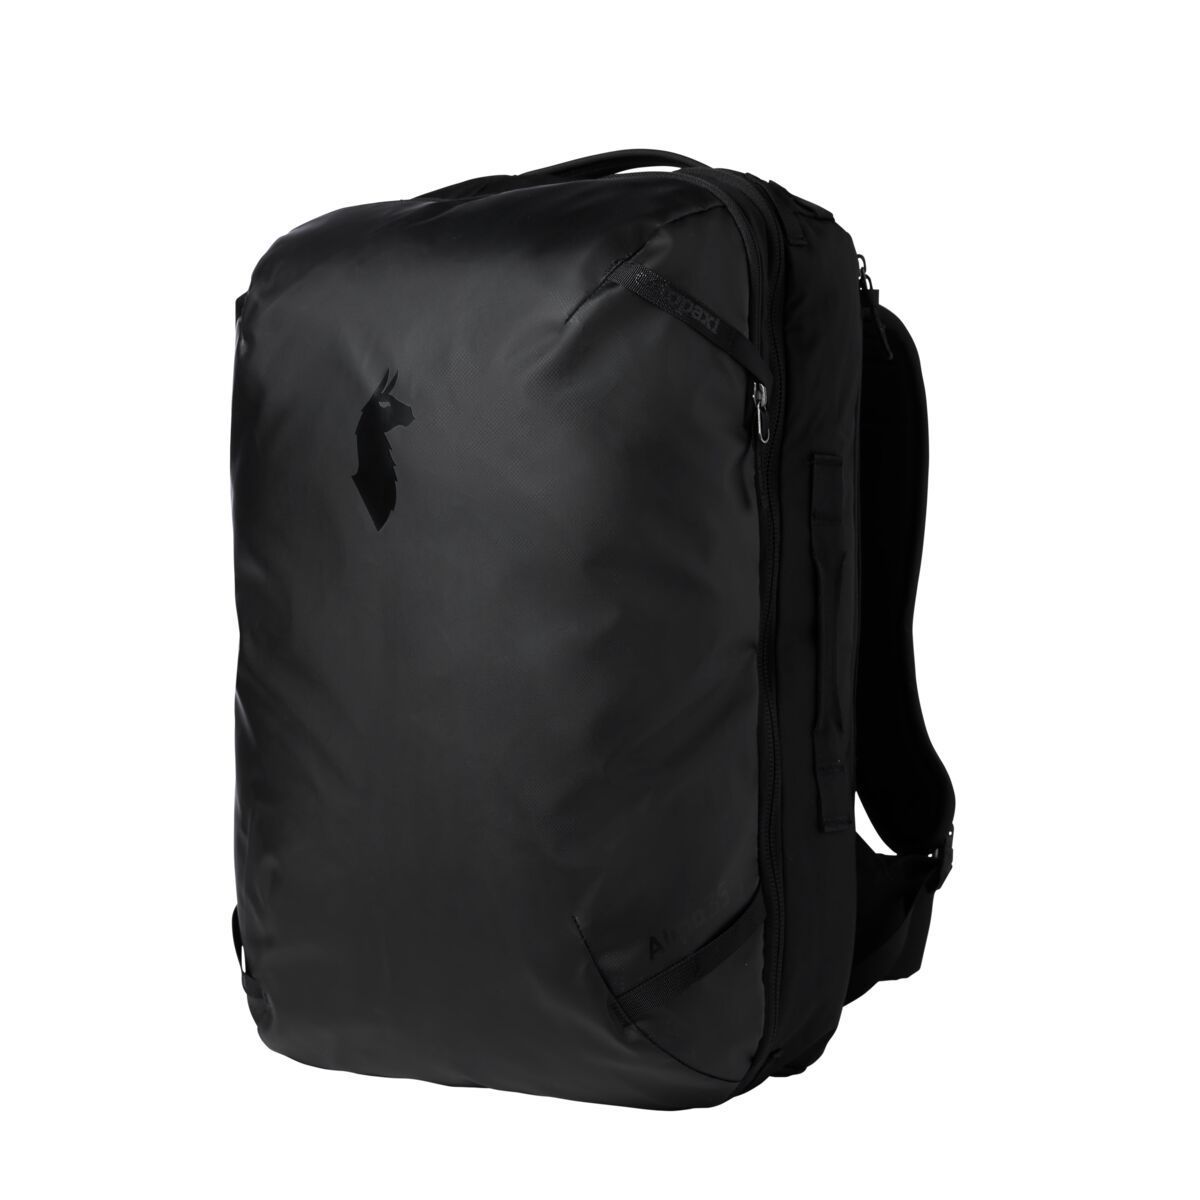 Cotopaxi Allpa Travel Pack